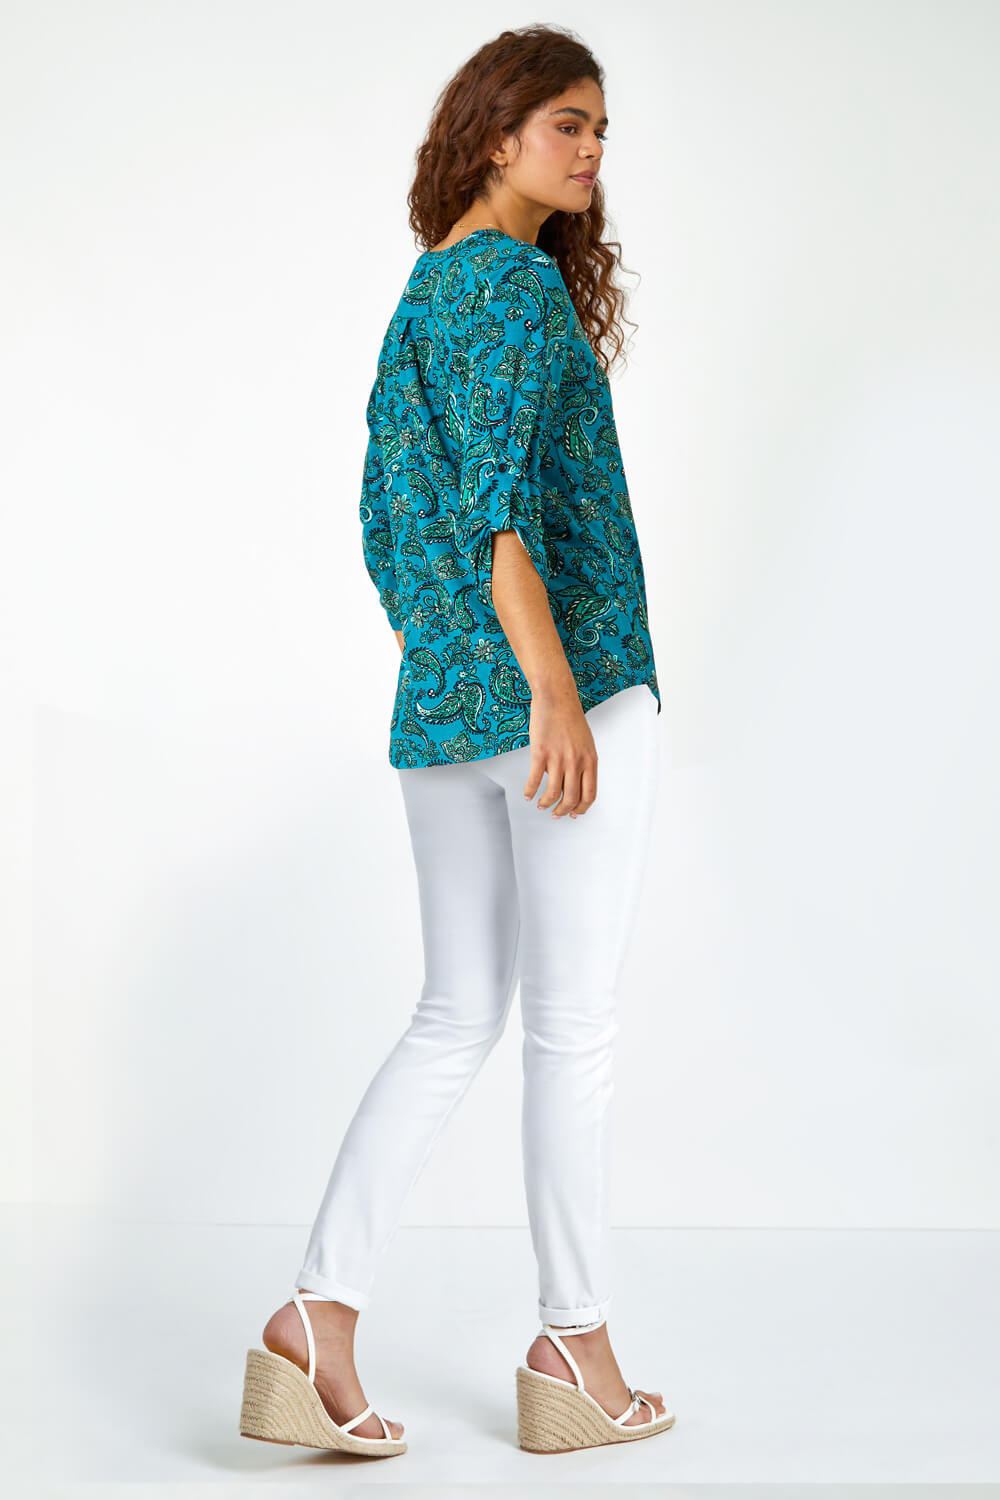 Teal Paisley Jersey Stretch Shirt, Image 3 of 5